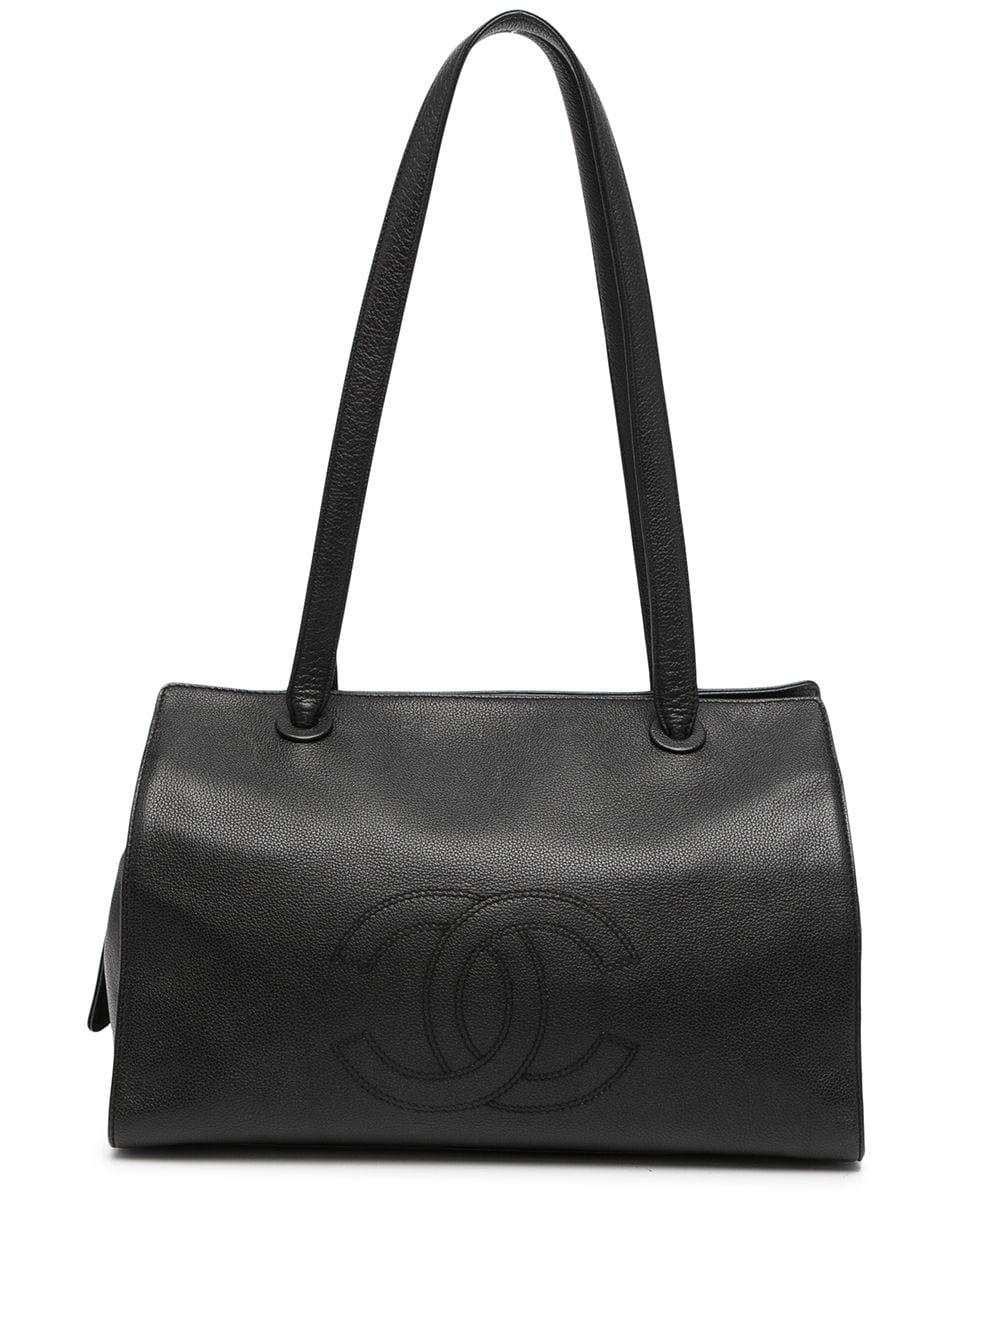 Chanel 1997 Vintage Black Caviar Large Work Business CC Tote Bag In Good Condition For Sale In Miami, FL